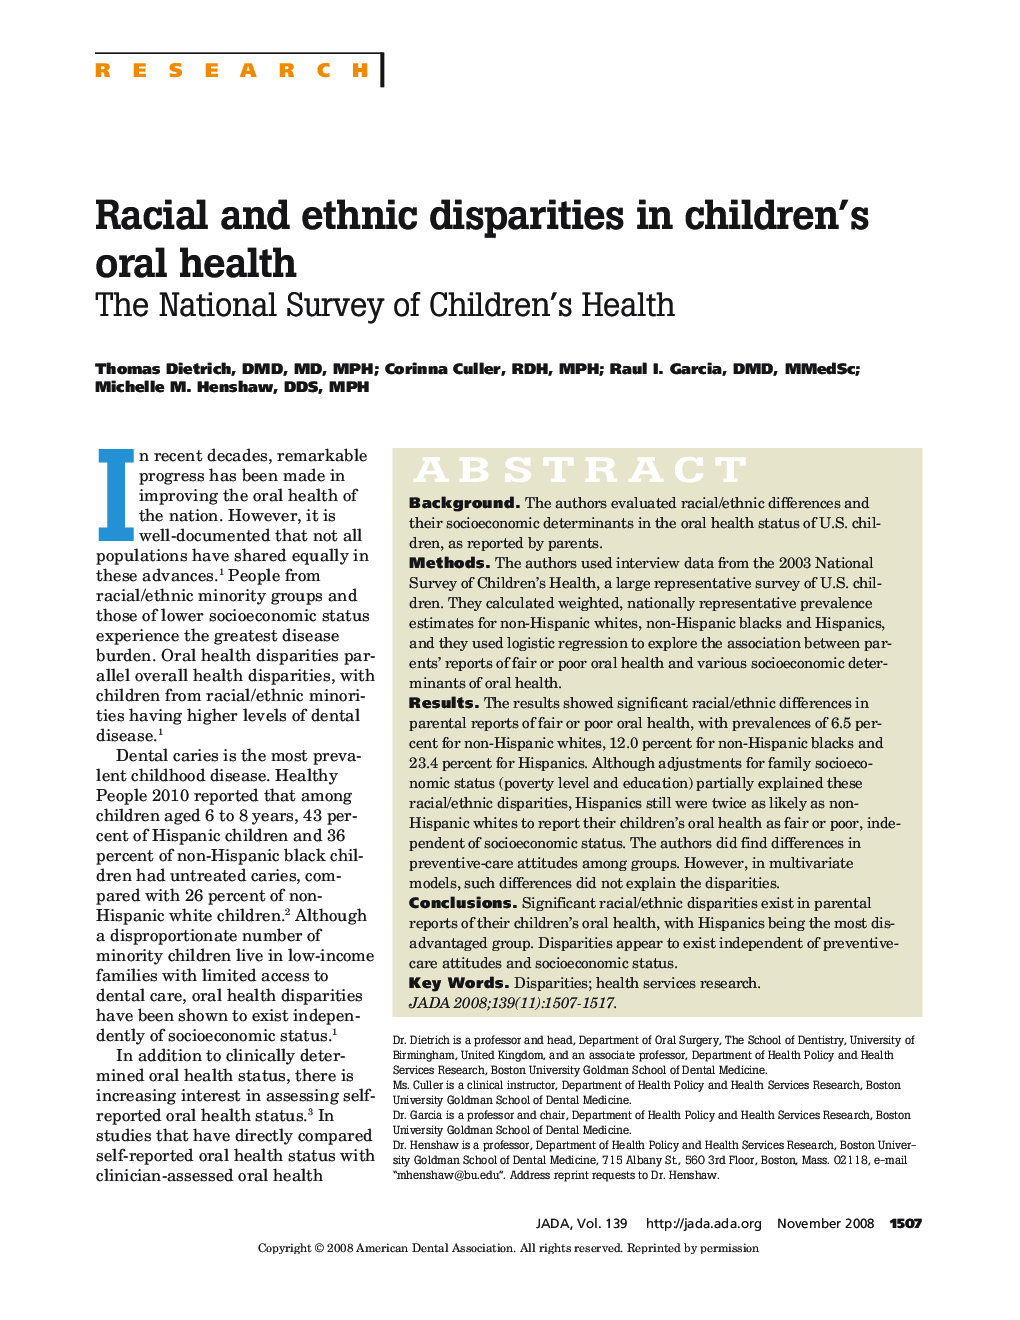 Racial and Ethnic Disparities in Children's Oral Health : The National Survey of Children's Health